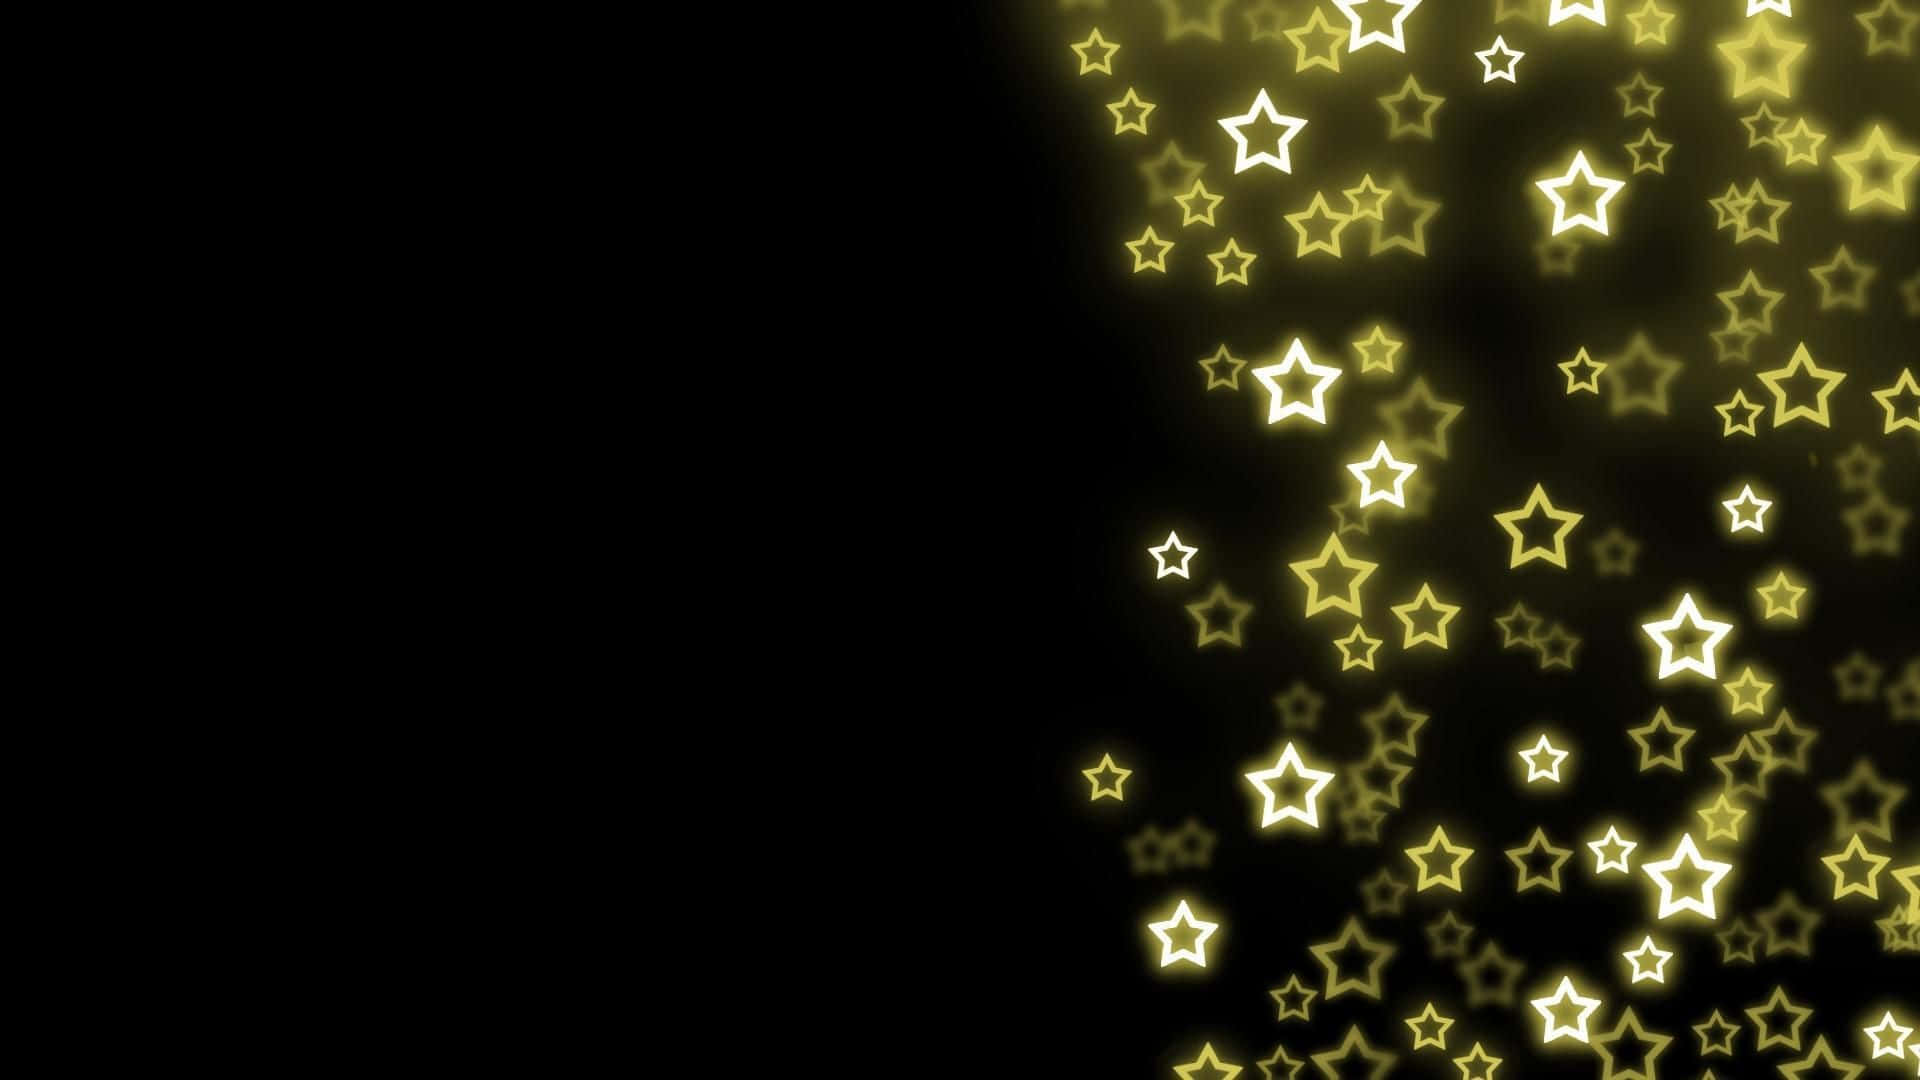 Let your inner star shine with this Aesthetic Star wallpaper Wallpaper